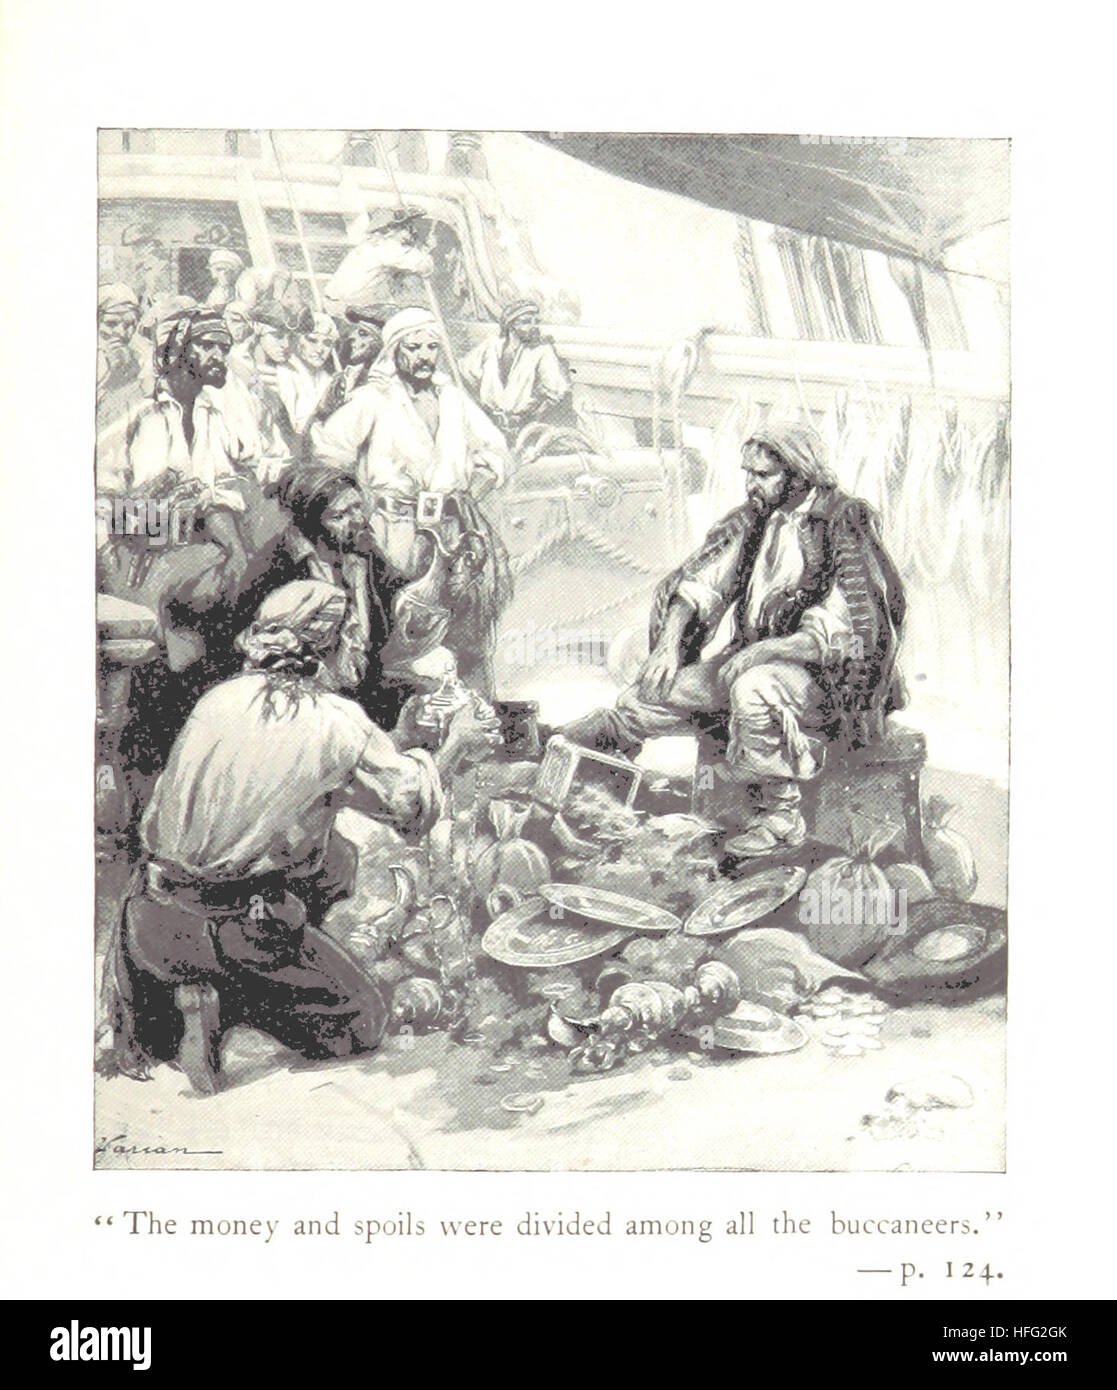 Image taken from page 153 of 'Buccaneers and Pirates of our Coasts ... With illustrations by G. Varian and B. W. Clinedinst' Image taken from page 153 of 'Buccaneers and Pirates of Stock Photo